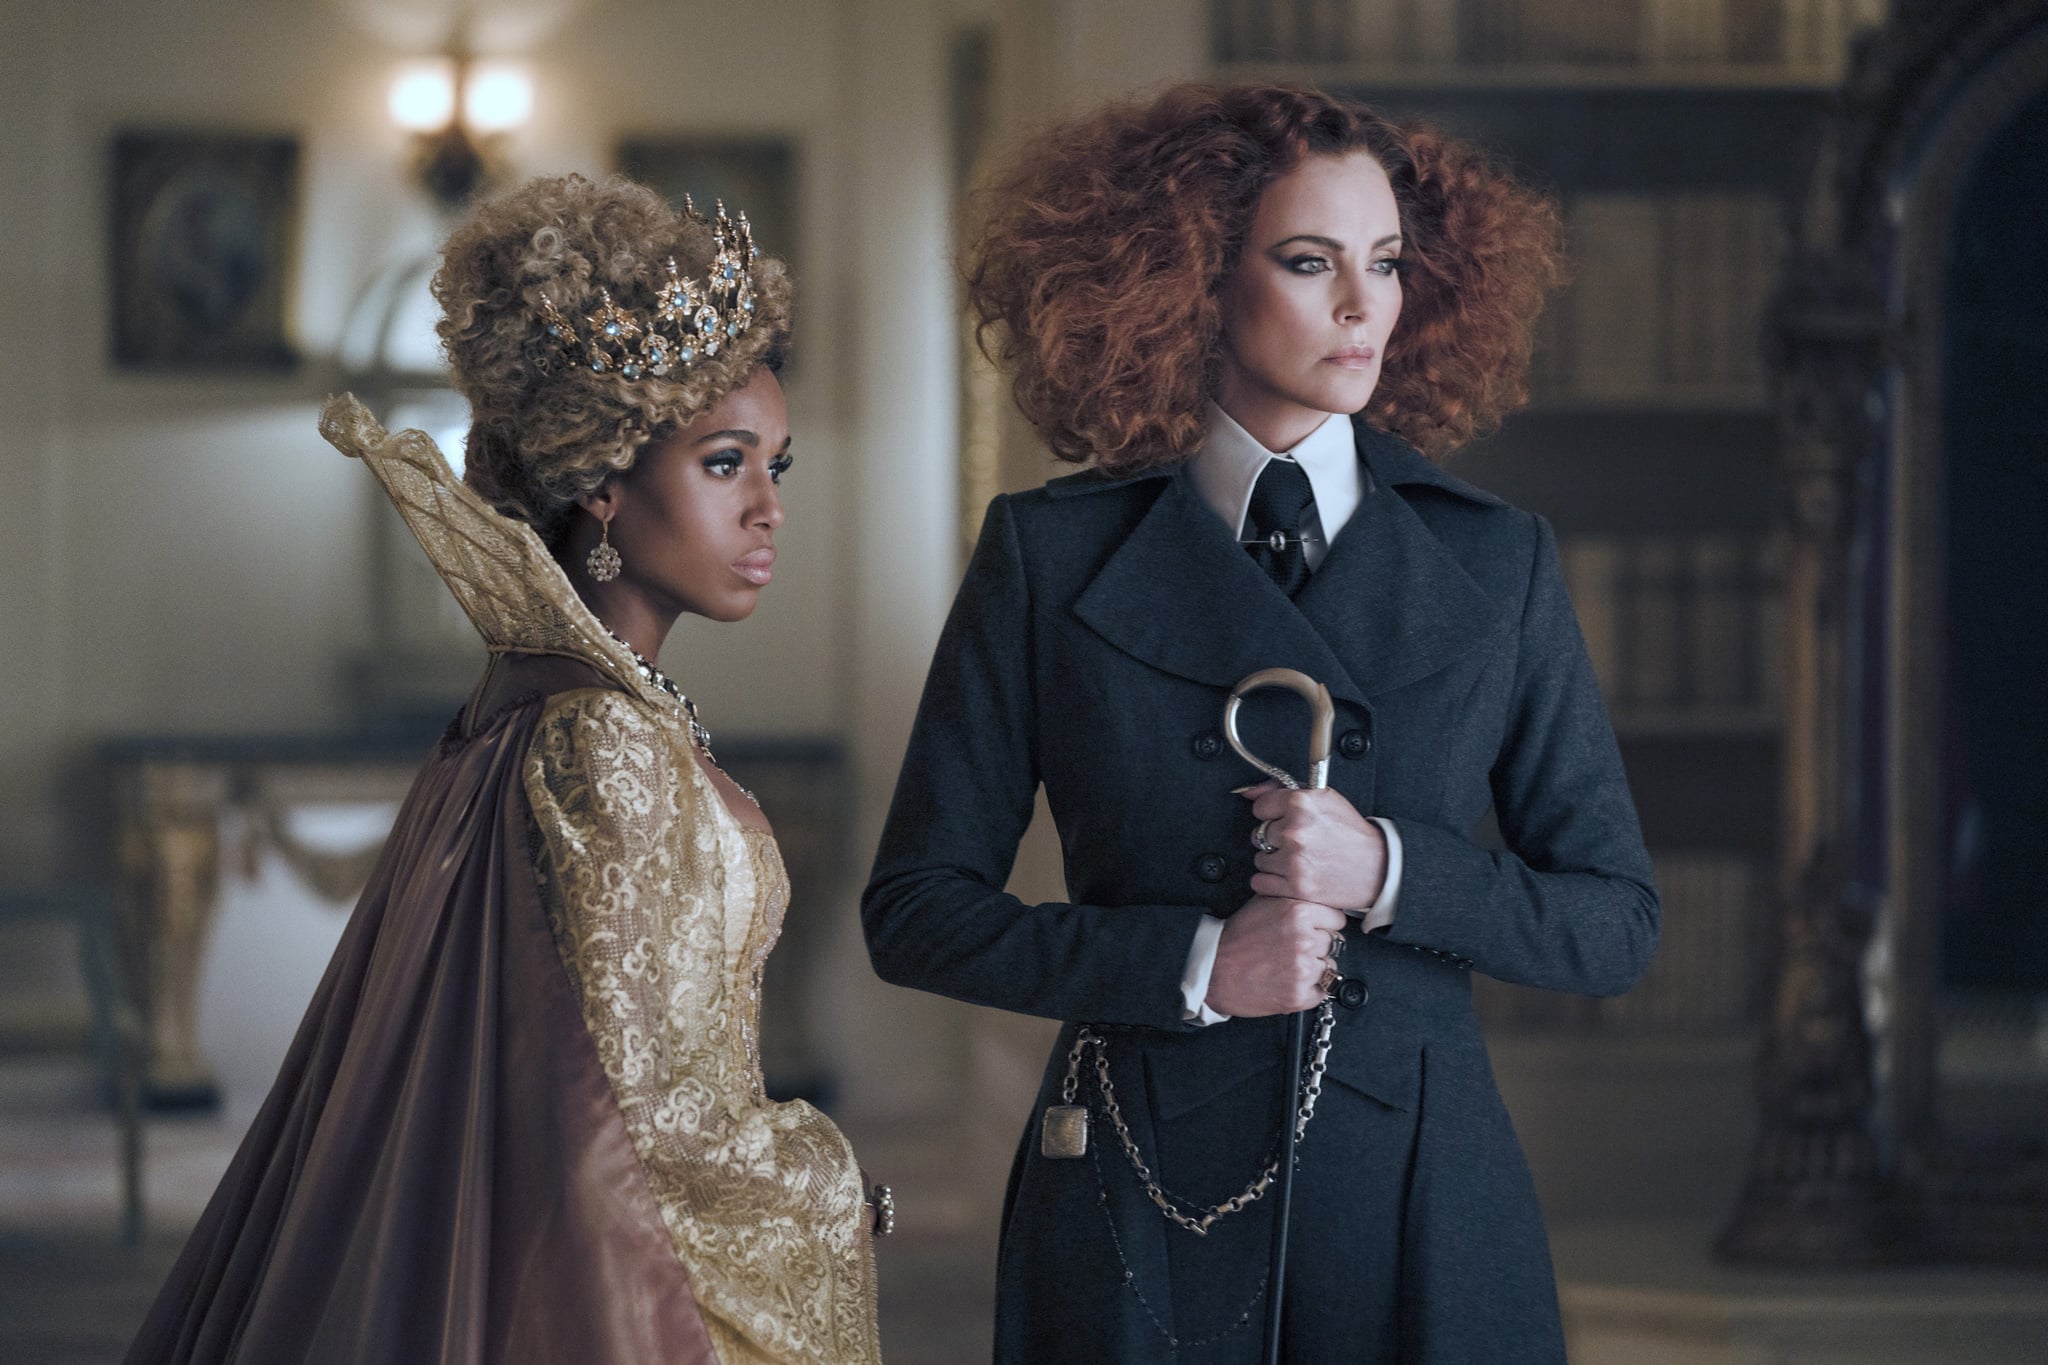 THE SCHOOL FOR GOOD AND EVIL, from left: Kerry Washington, Charlize Theron, 2022. ph: Helen Sloan / Netflix /Courtesy Everett Collection